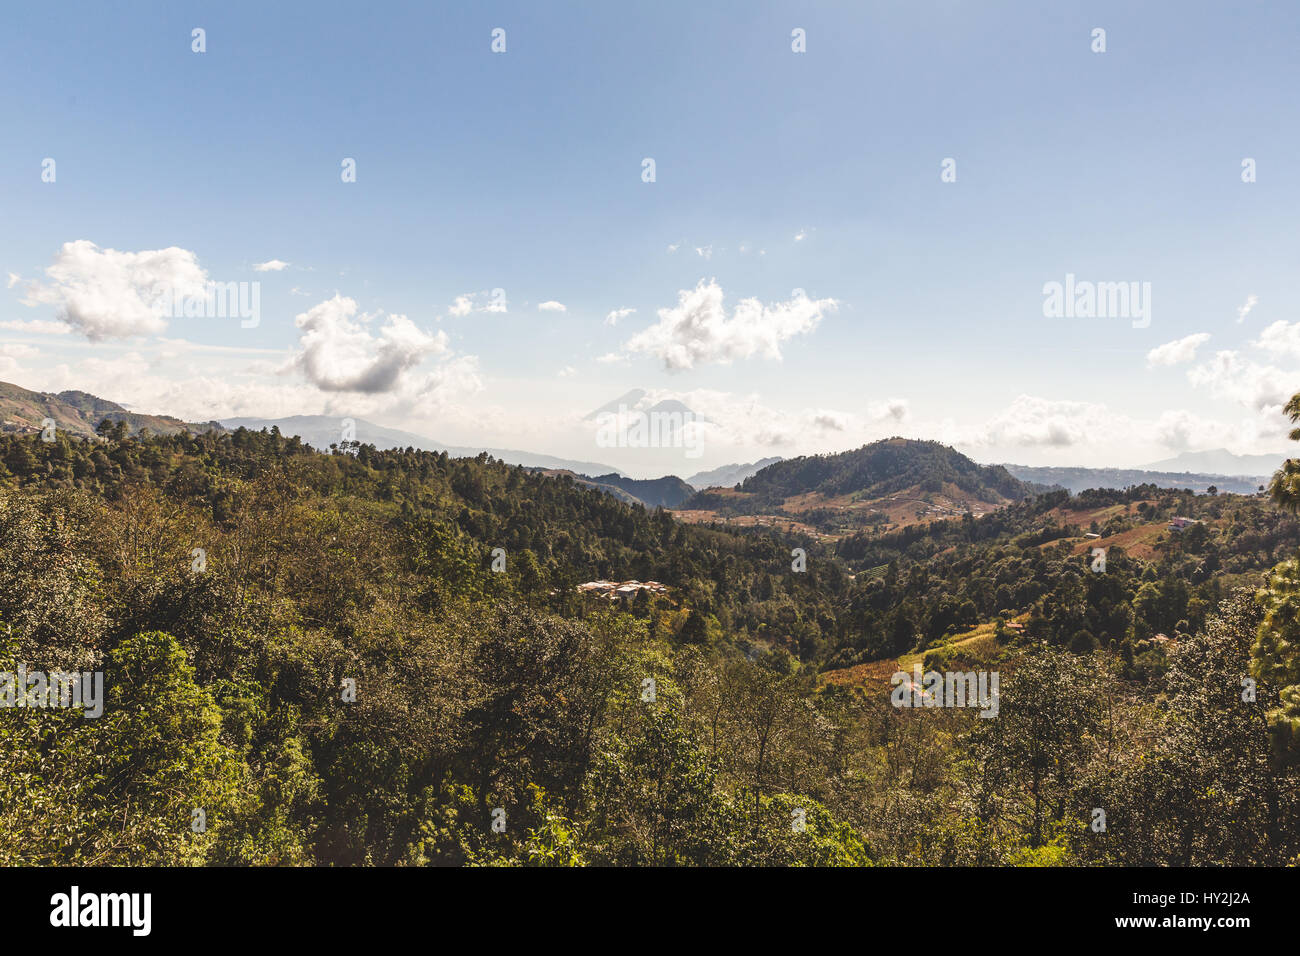 Guatemala's twin volcanoes, Fuego (left) and Acatenango (right), surrounded in clouds on a sunny day. Stock Photo